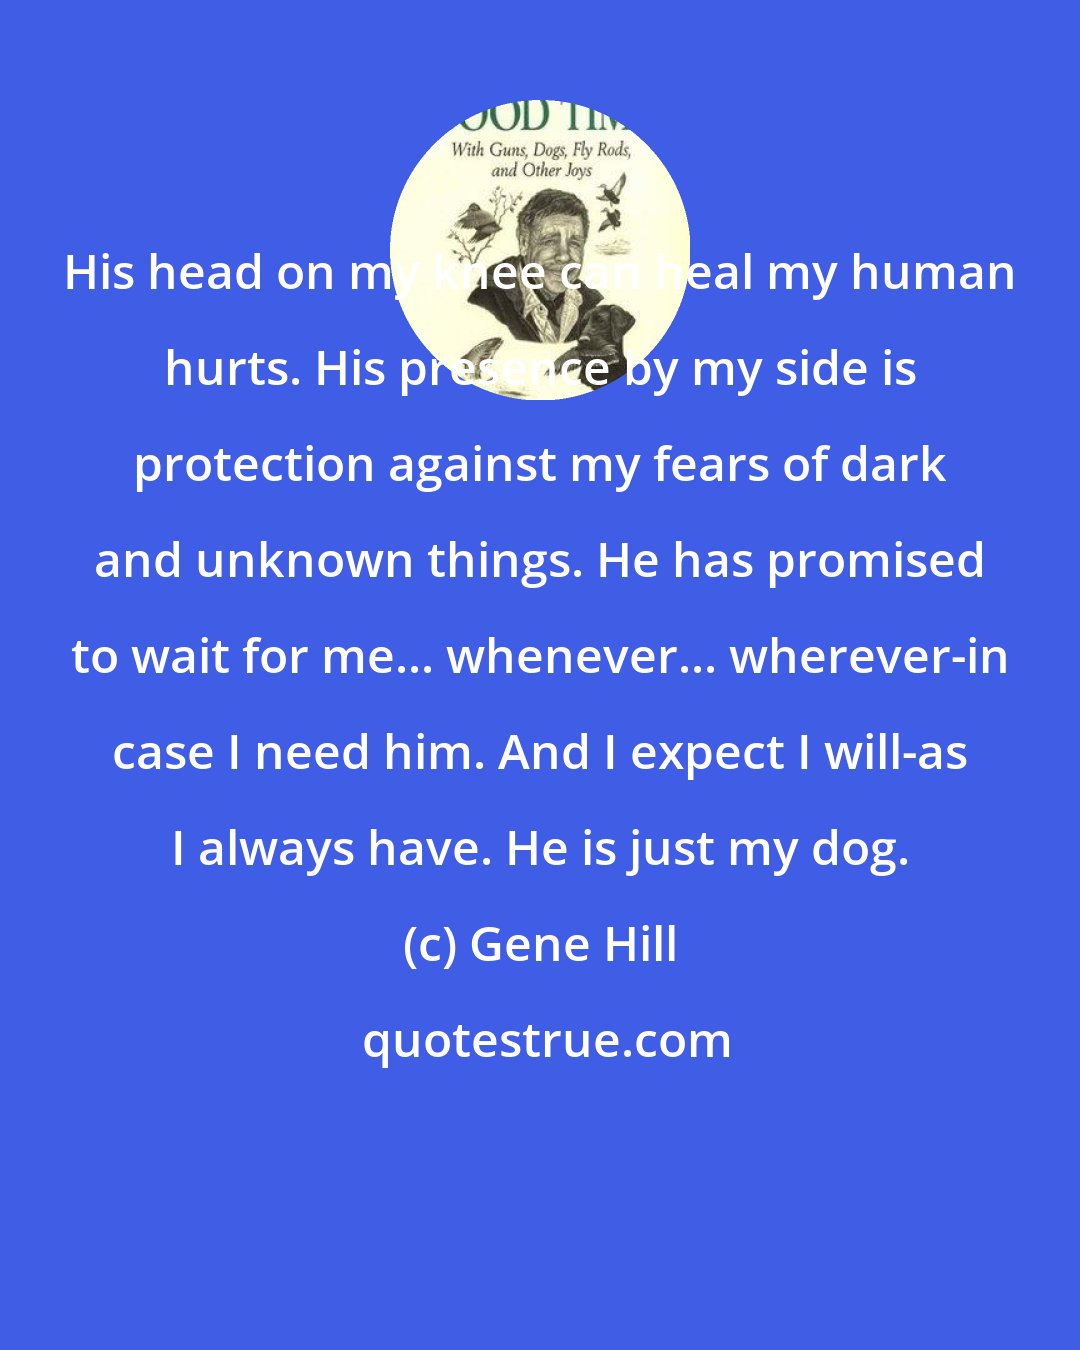 Gene Hill: His head on my knee can heal my human hurts. His presence by my side is protection against my fears of dark and unknown things. He has promised to wait for me... whenever... wherever-in case I need him. And I expect I will-as I always have. He is just my dog.